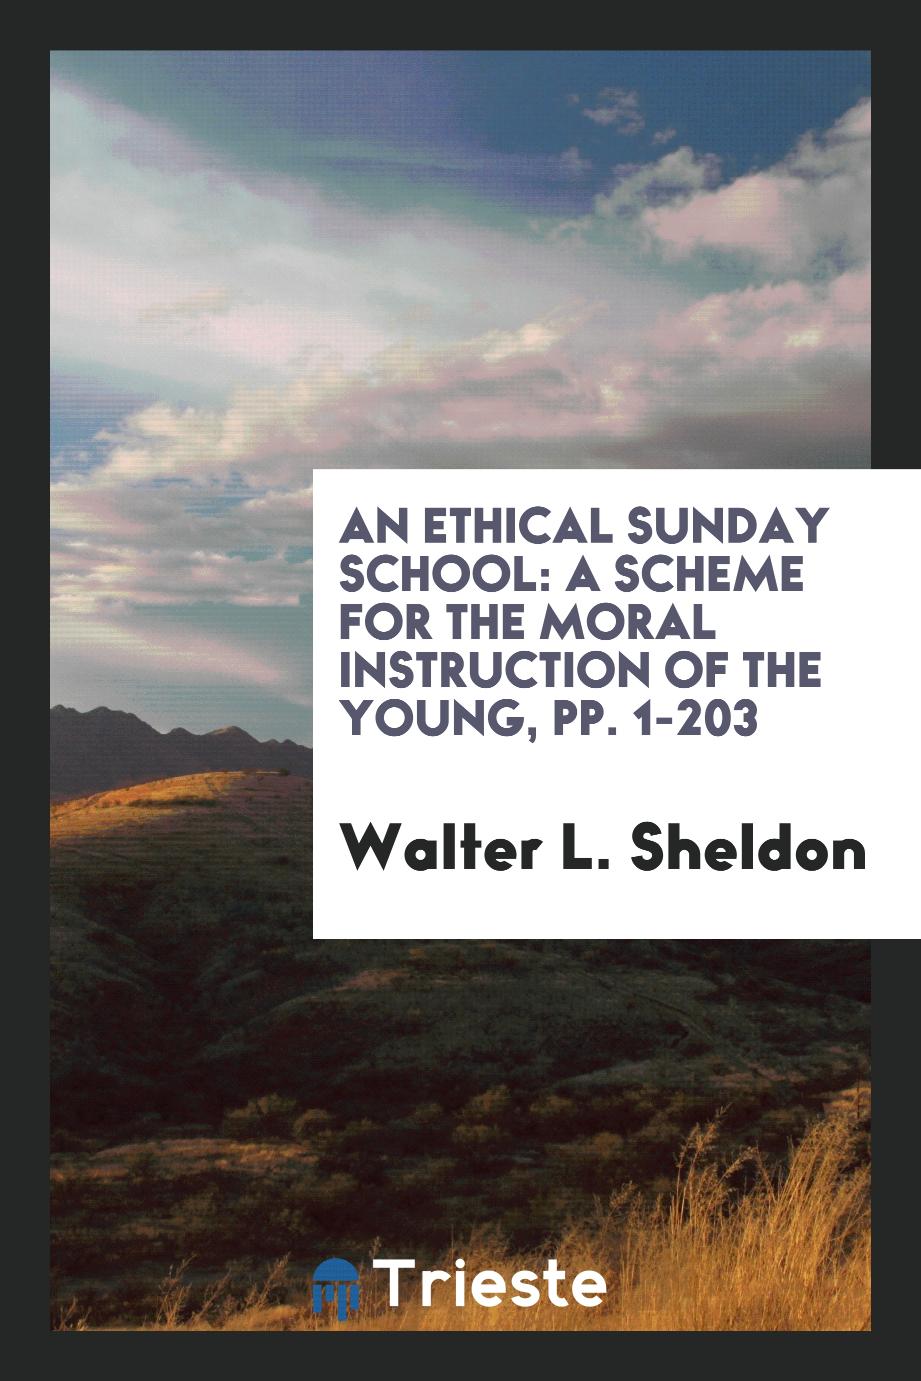 An Ethical Sunday School: A Scheme for the Moral Instruction of the Young, pp. 1-203